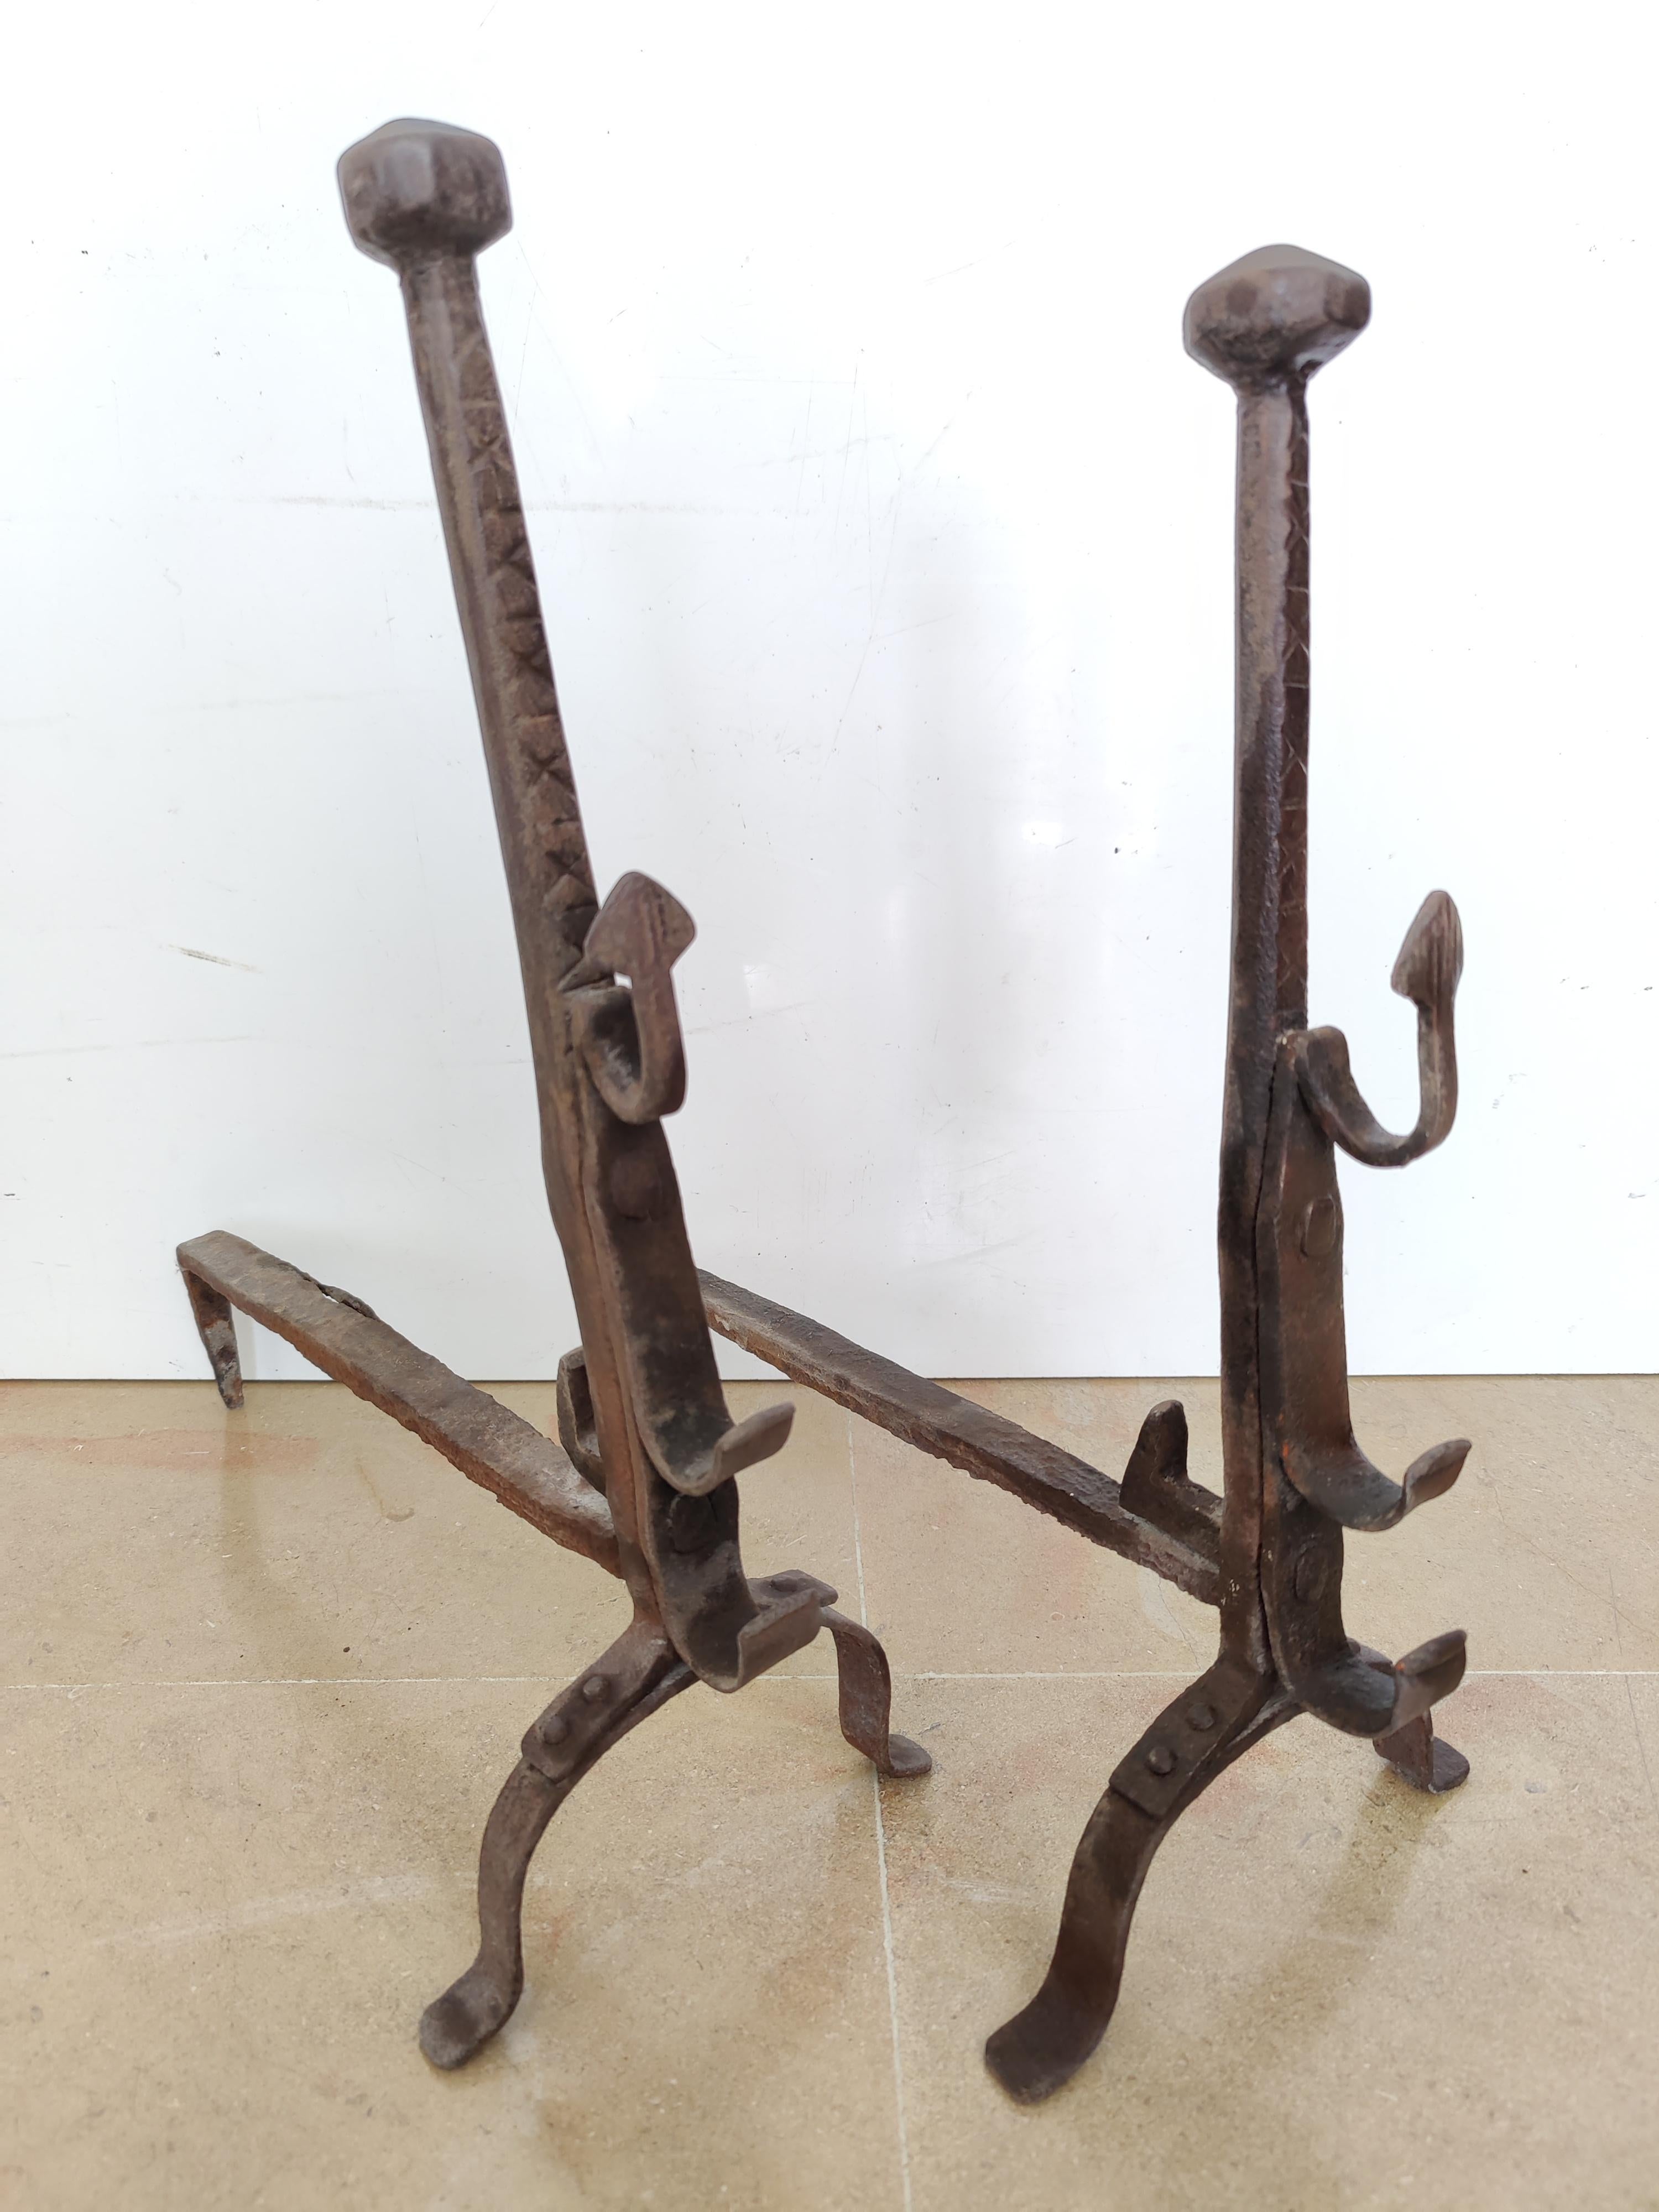 Antique andirons 17th century.

Weight: 9 lbs / 4 kg.

Upon request they can be made black / pewter.

See all our antique fireplaces and fireplace accessories at 1stdibs by pressing the ‘View All From Seller’ button.